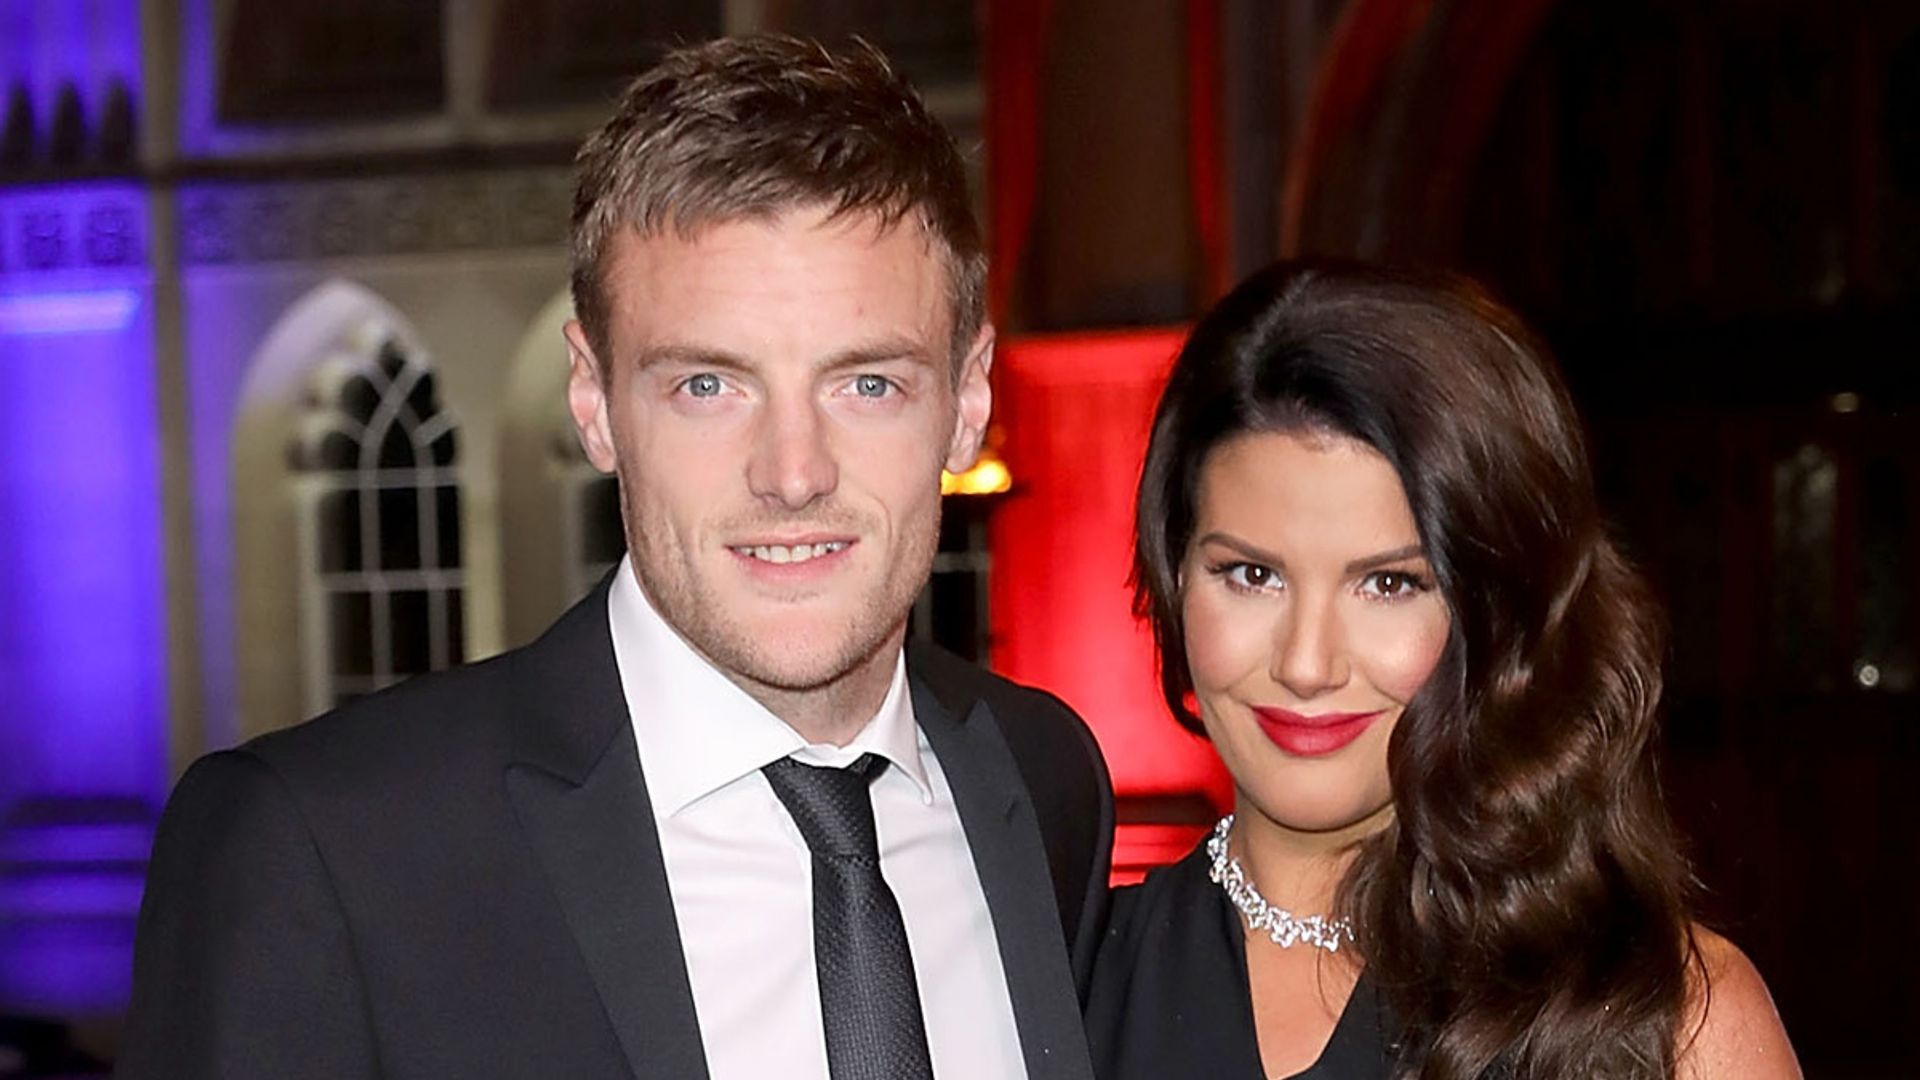 Rebekah Vardy confirms she is pregnant with fifth child – see adorable photo